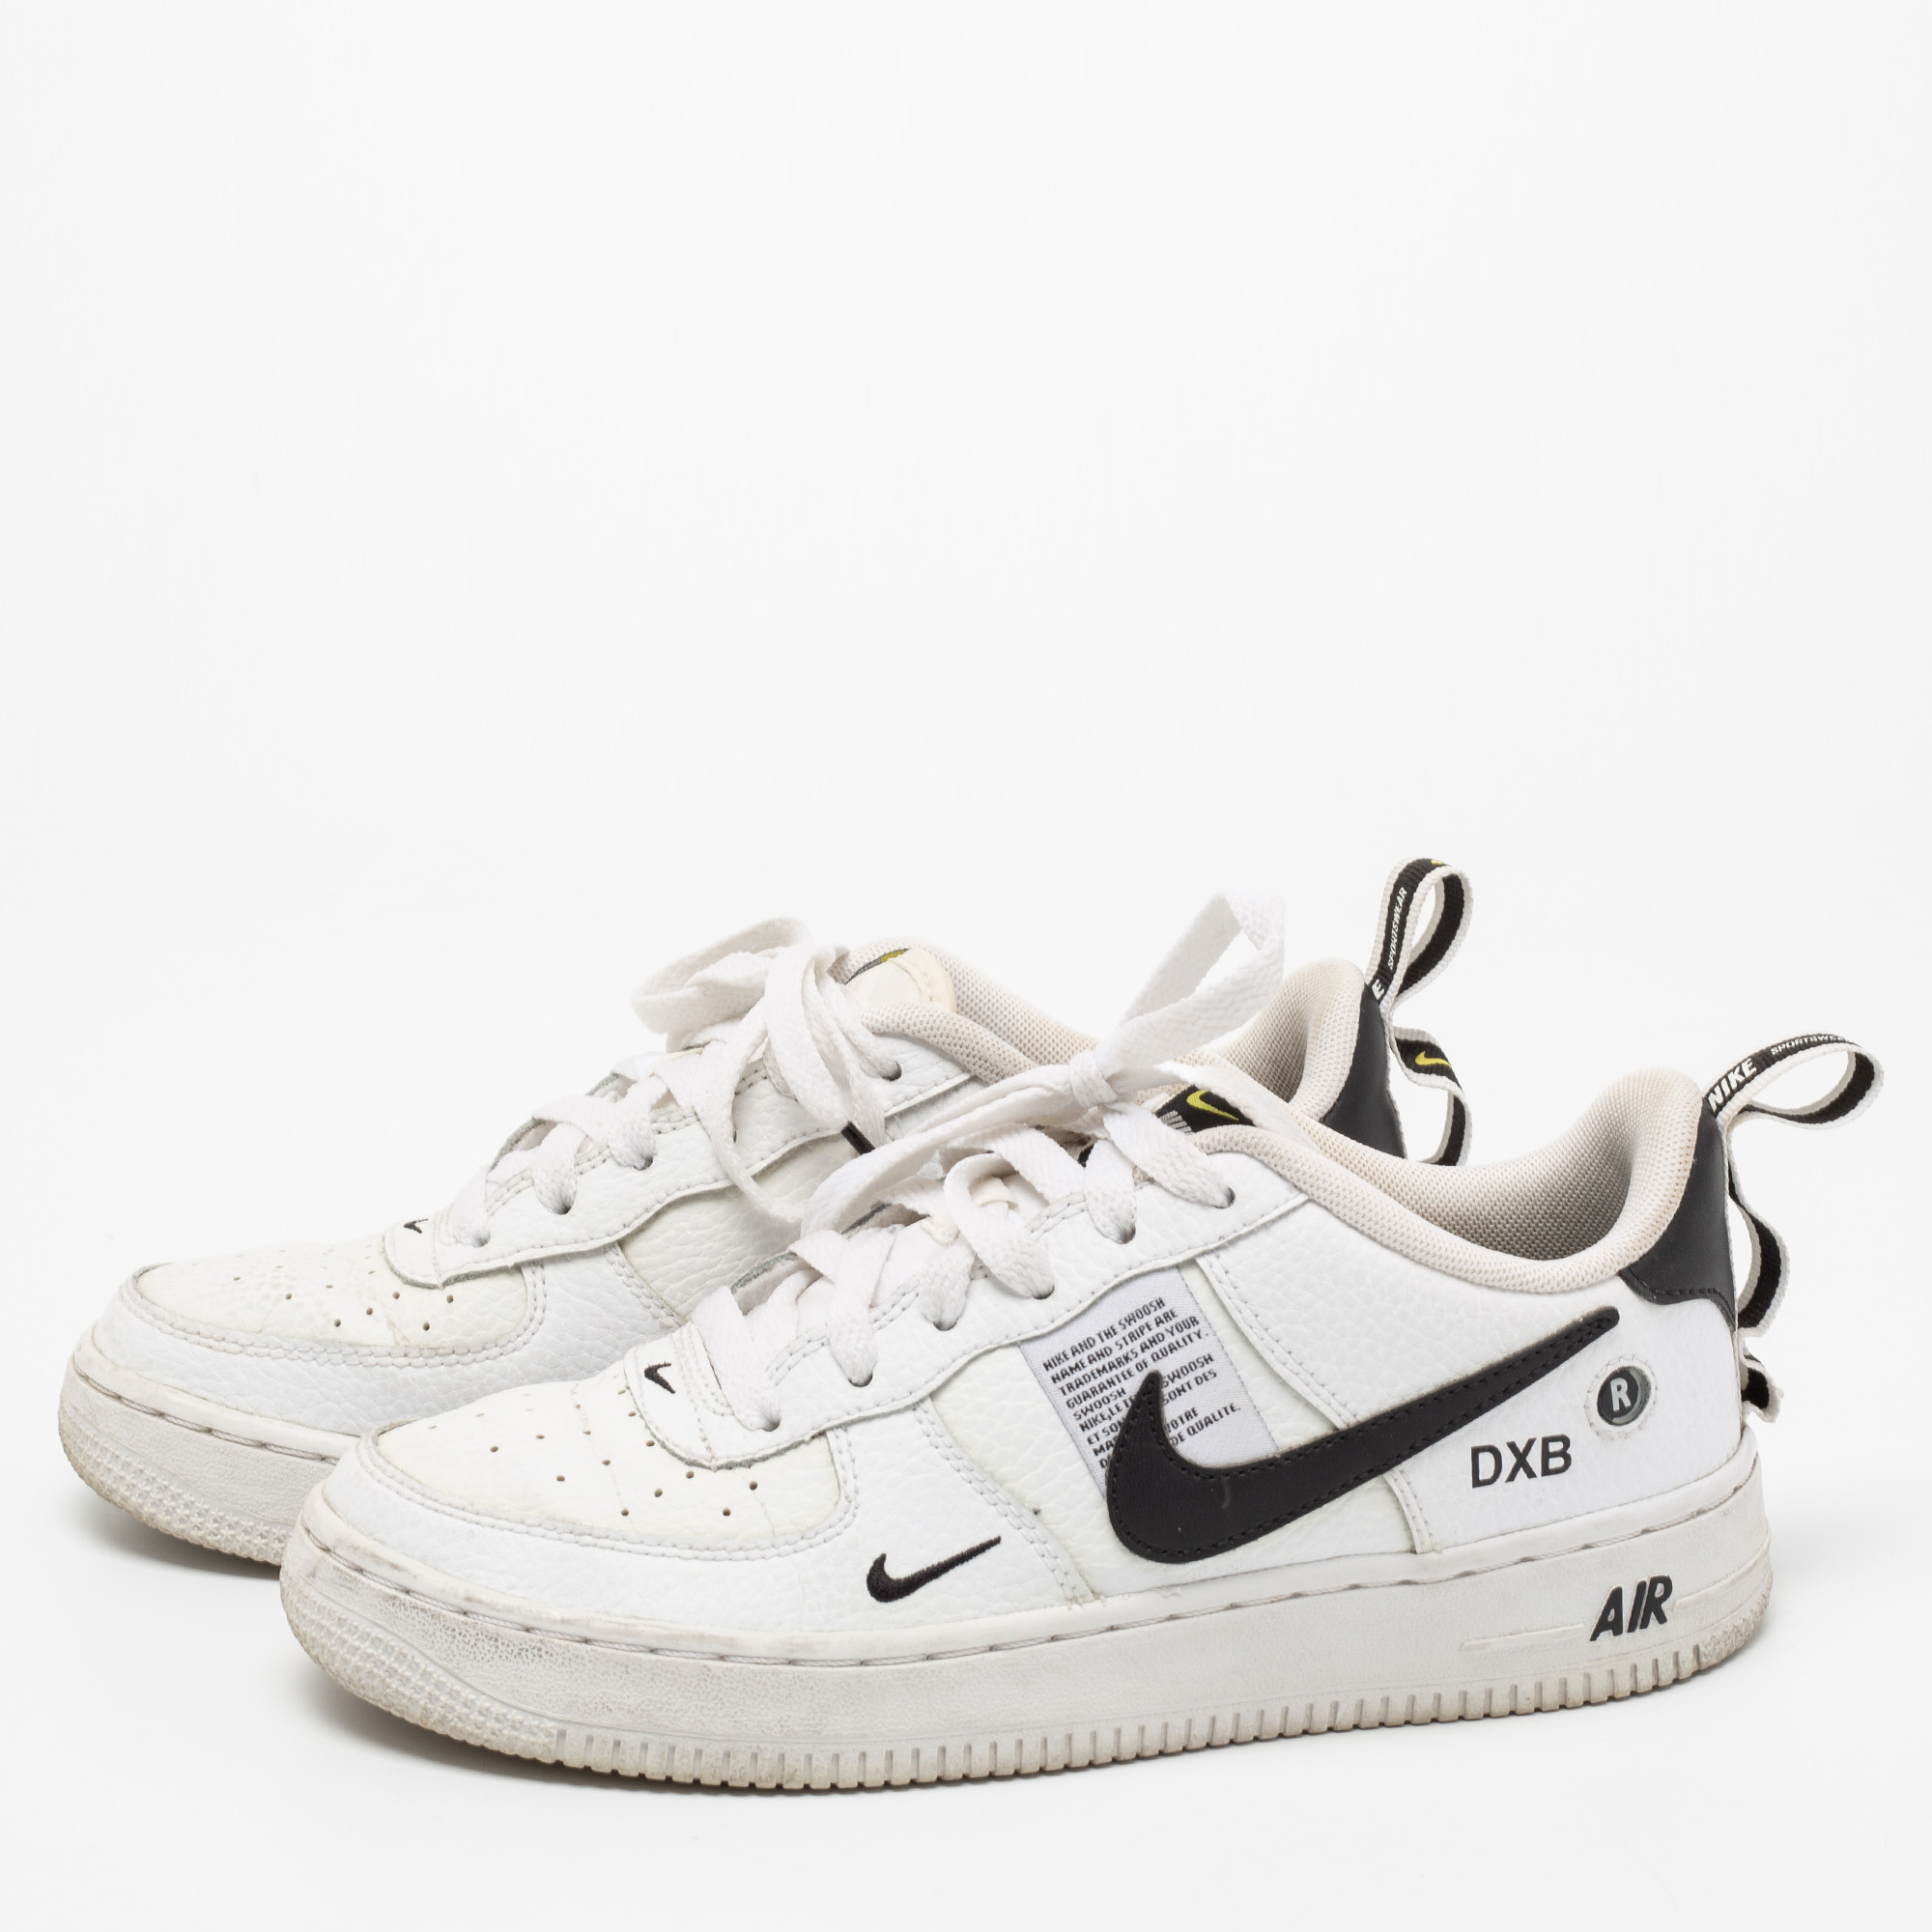 

Nike White/Black Leather Nike Air Force 1 Utility Low Top Sneakers Size